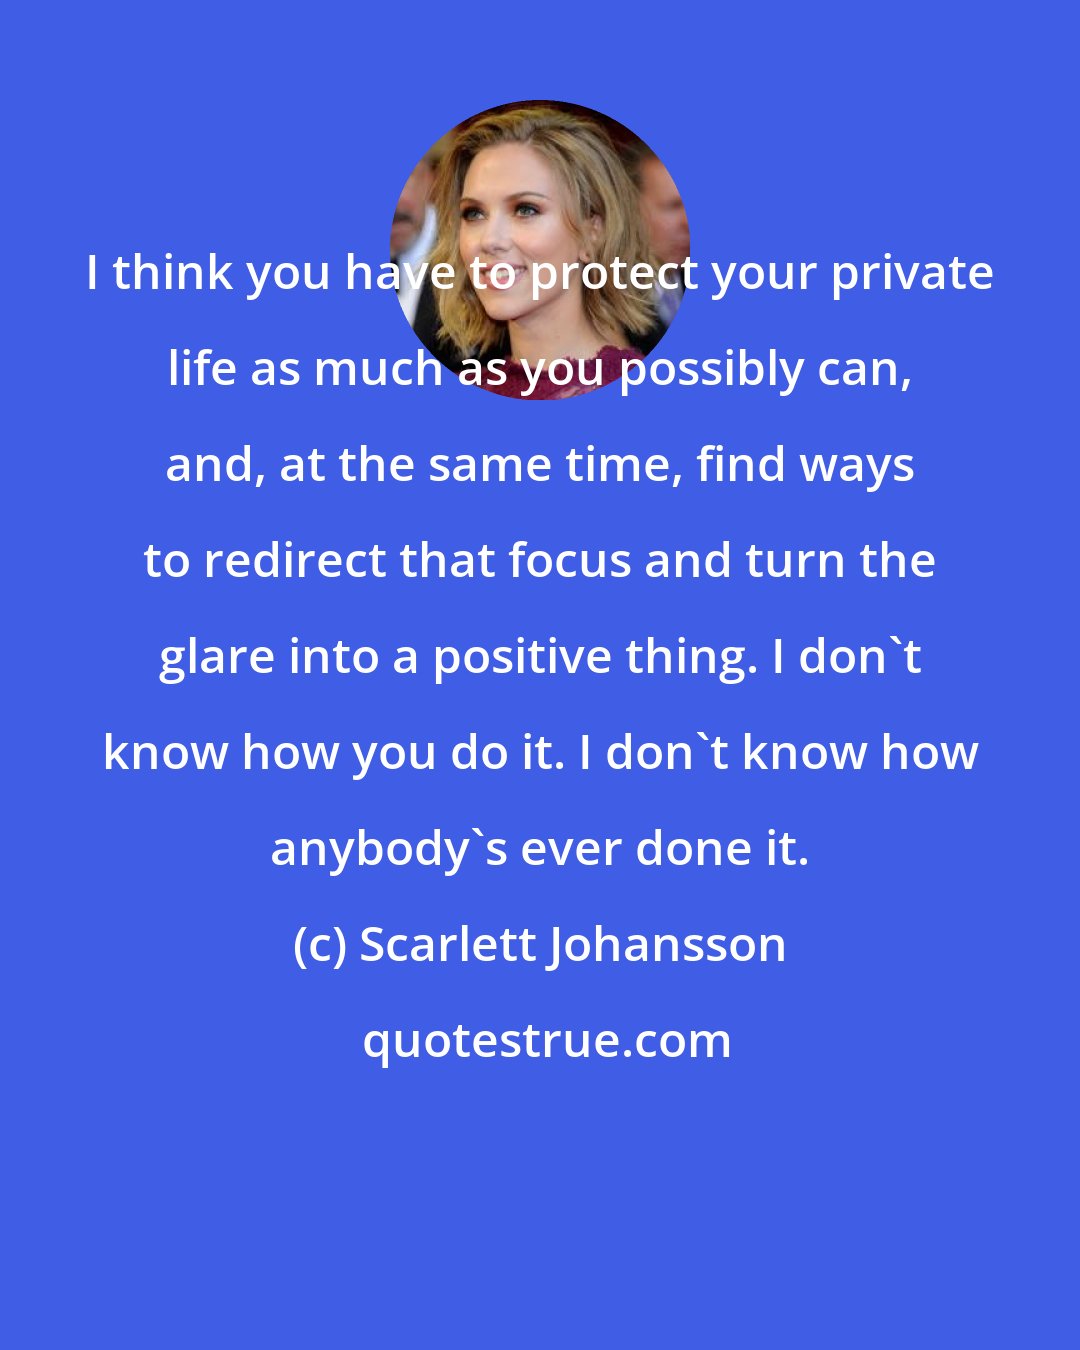 Scarlett Johansson: I think you have to protect your private life as much as you possibly can, and, at the same time, find ways to redirect that focus and turn the glare into a positive thing. I don't know how you do it. I don't know how anybody's ever done it.